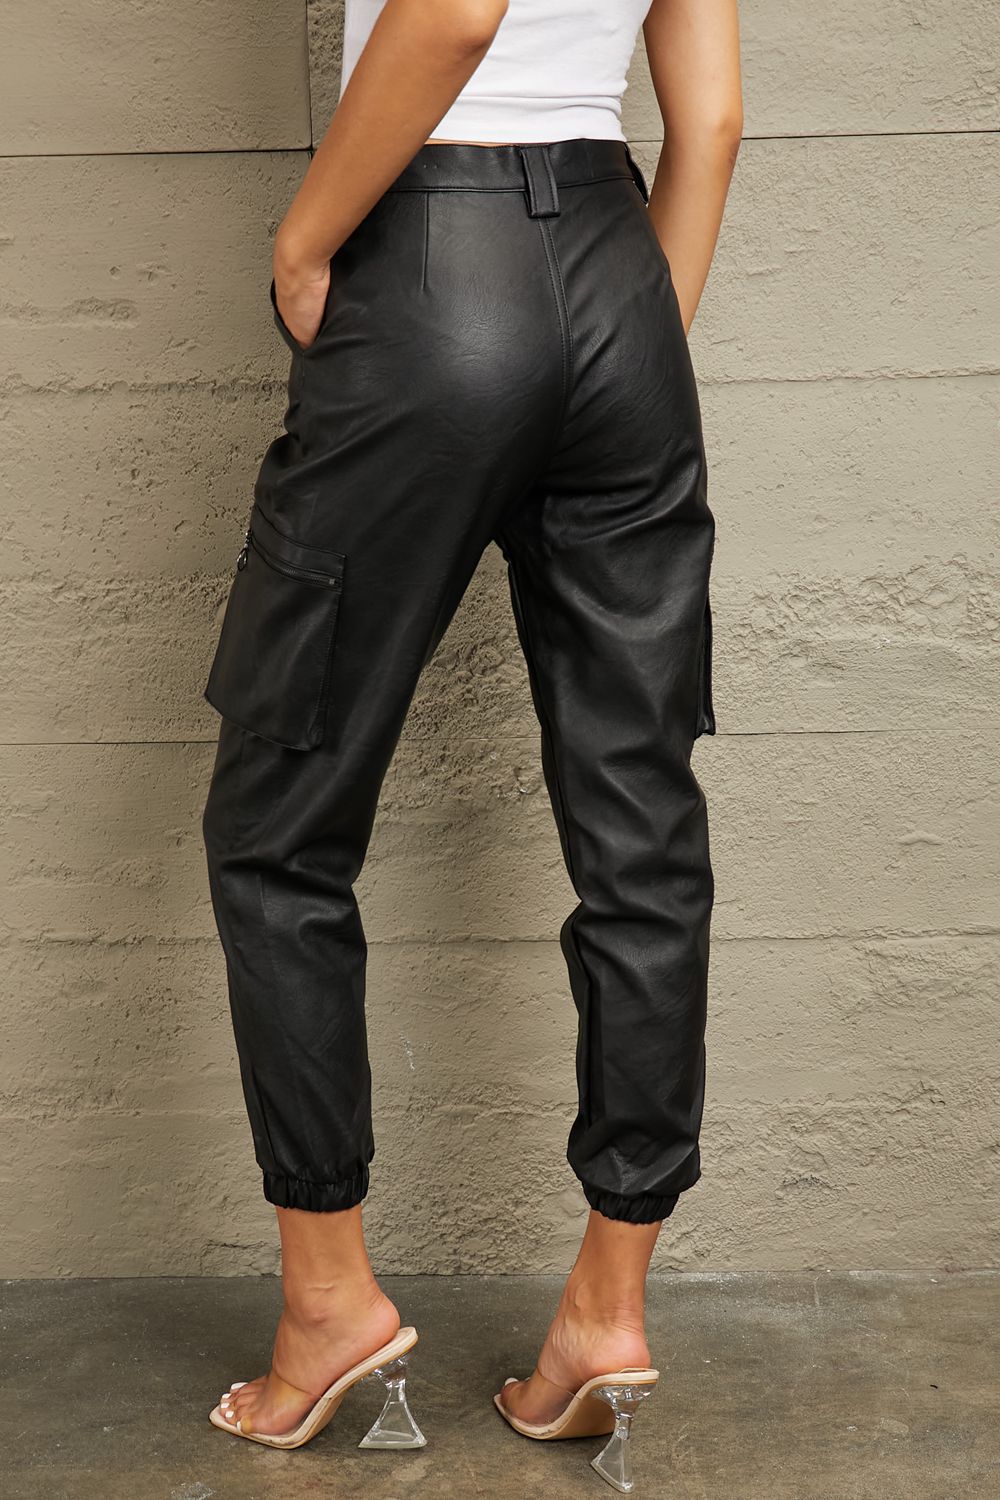 These joggers boast a high-rise waist that flatters your silhouette and provides a comfortable fit. The luxurious leather adds a touch of edge to your ensemble, whether you're dressing up for a night out or adding a chic twist to your everyday look. With a relaxed jogger silhouette and a high-fashion edge, these leather joggers are a versatile must-have for any fashion-forward wardrobe.